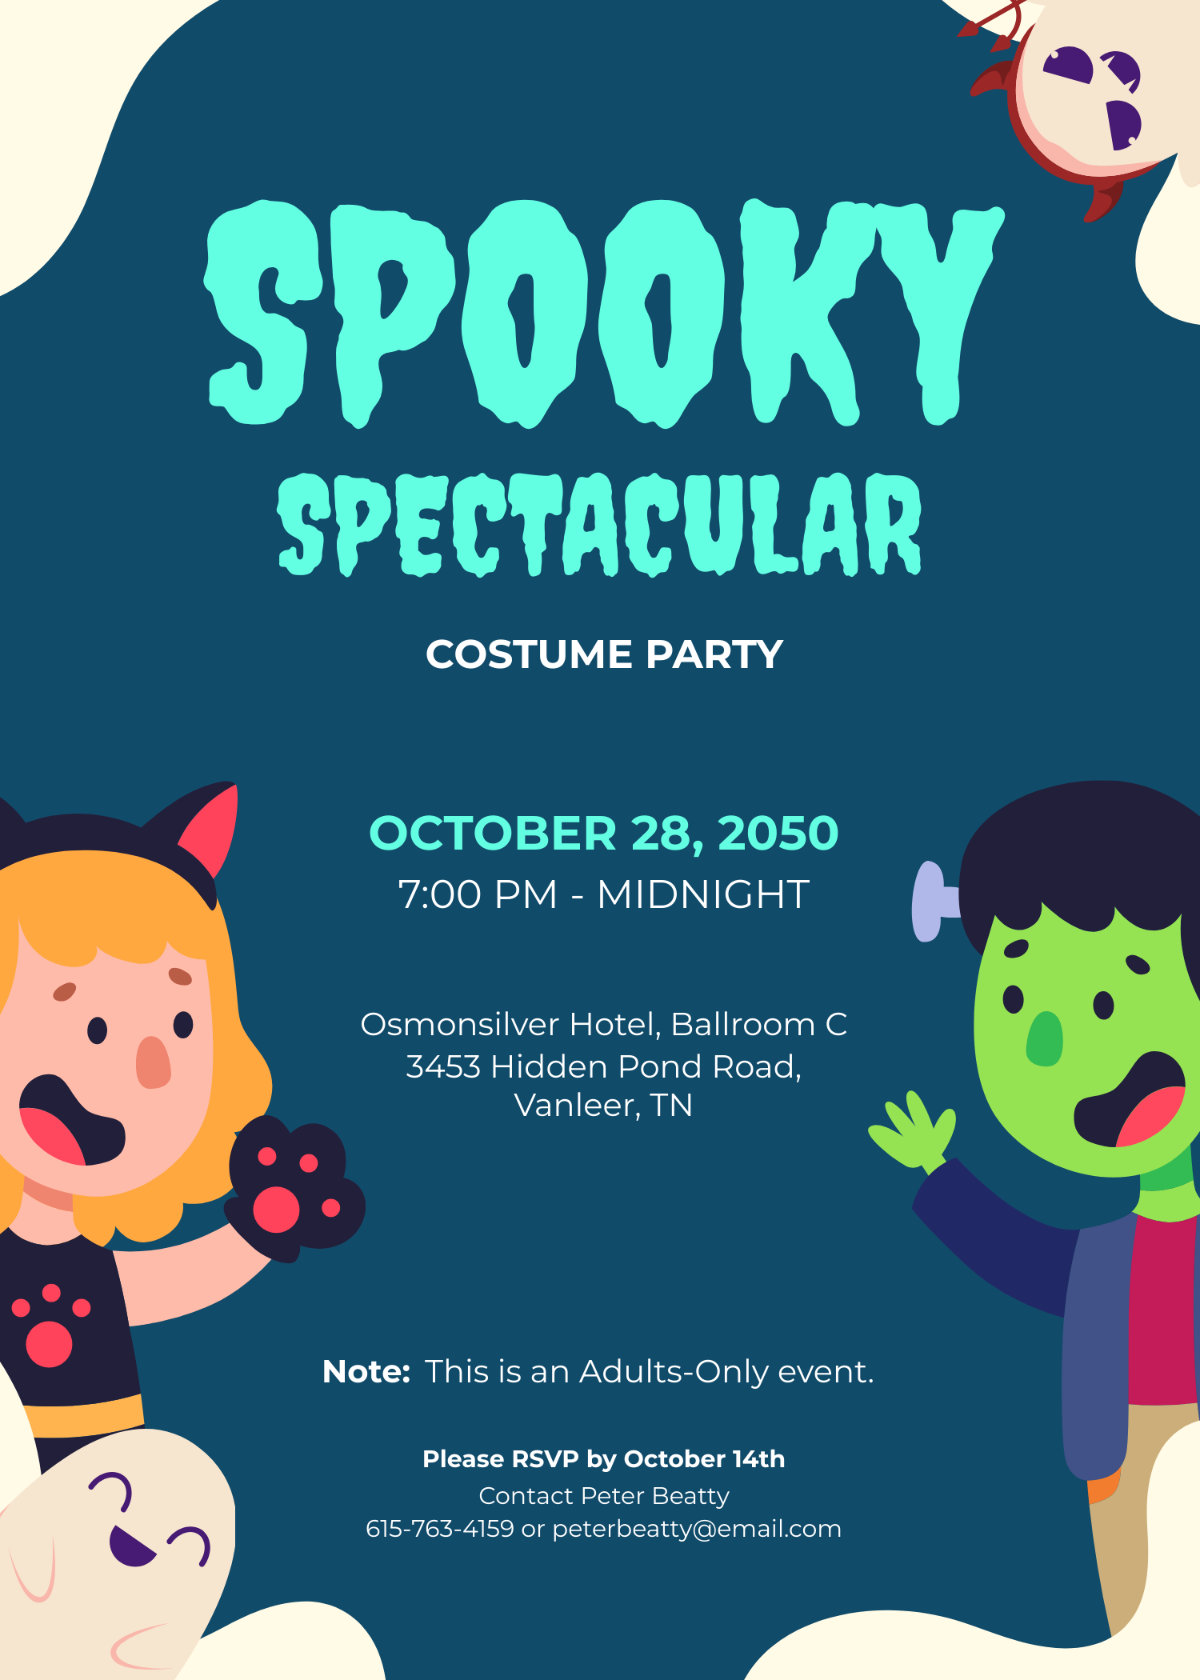 Costume Party Invitation for Adults